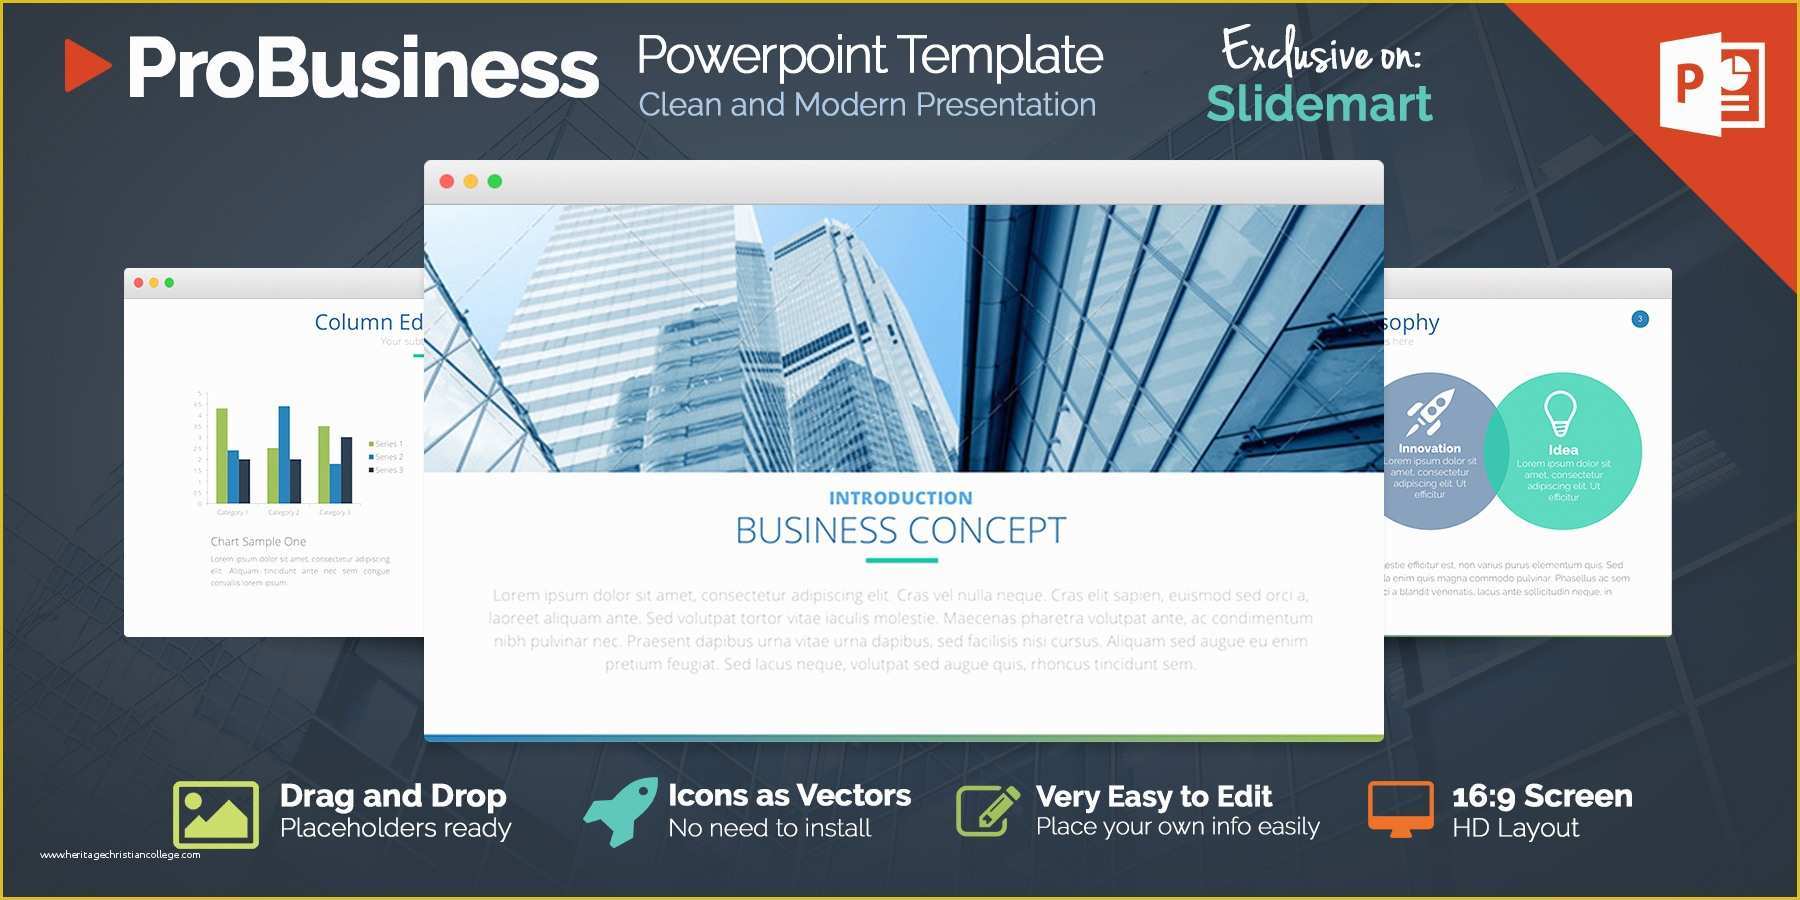 Free Presentation Templates Of the Best 8 Free Powerpoint Templates